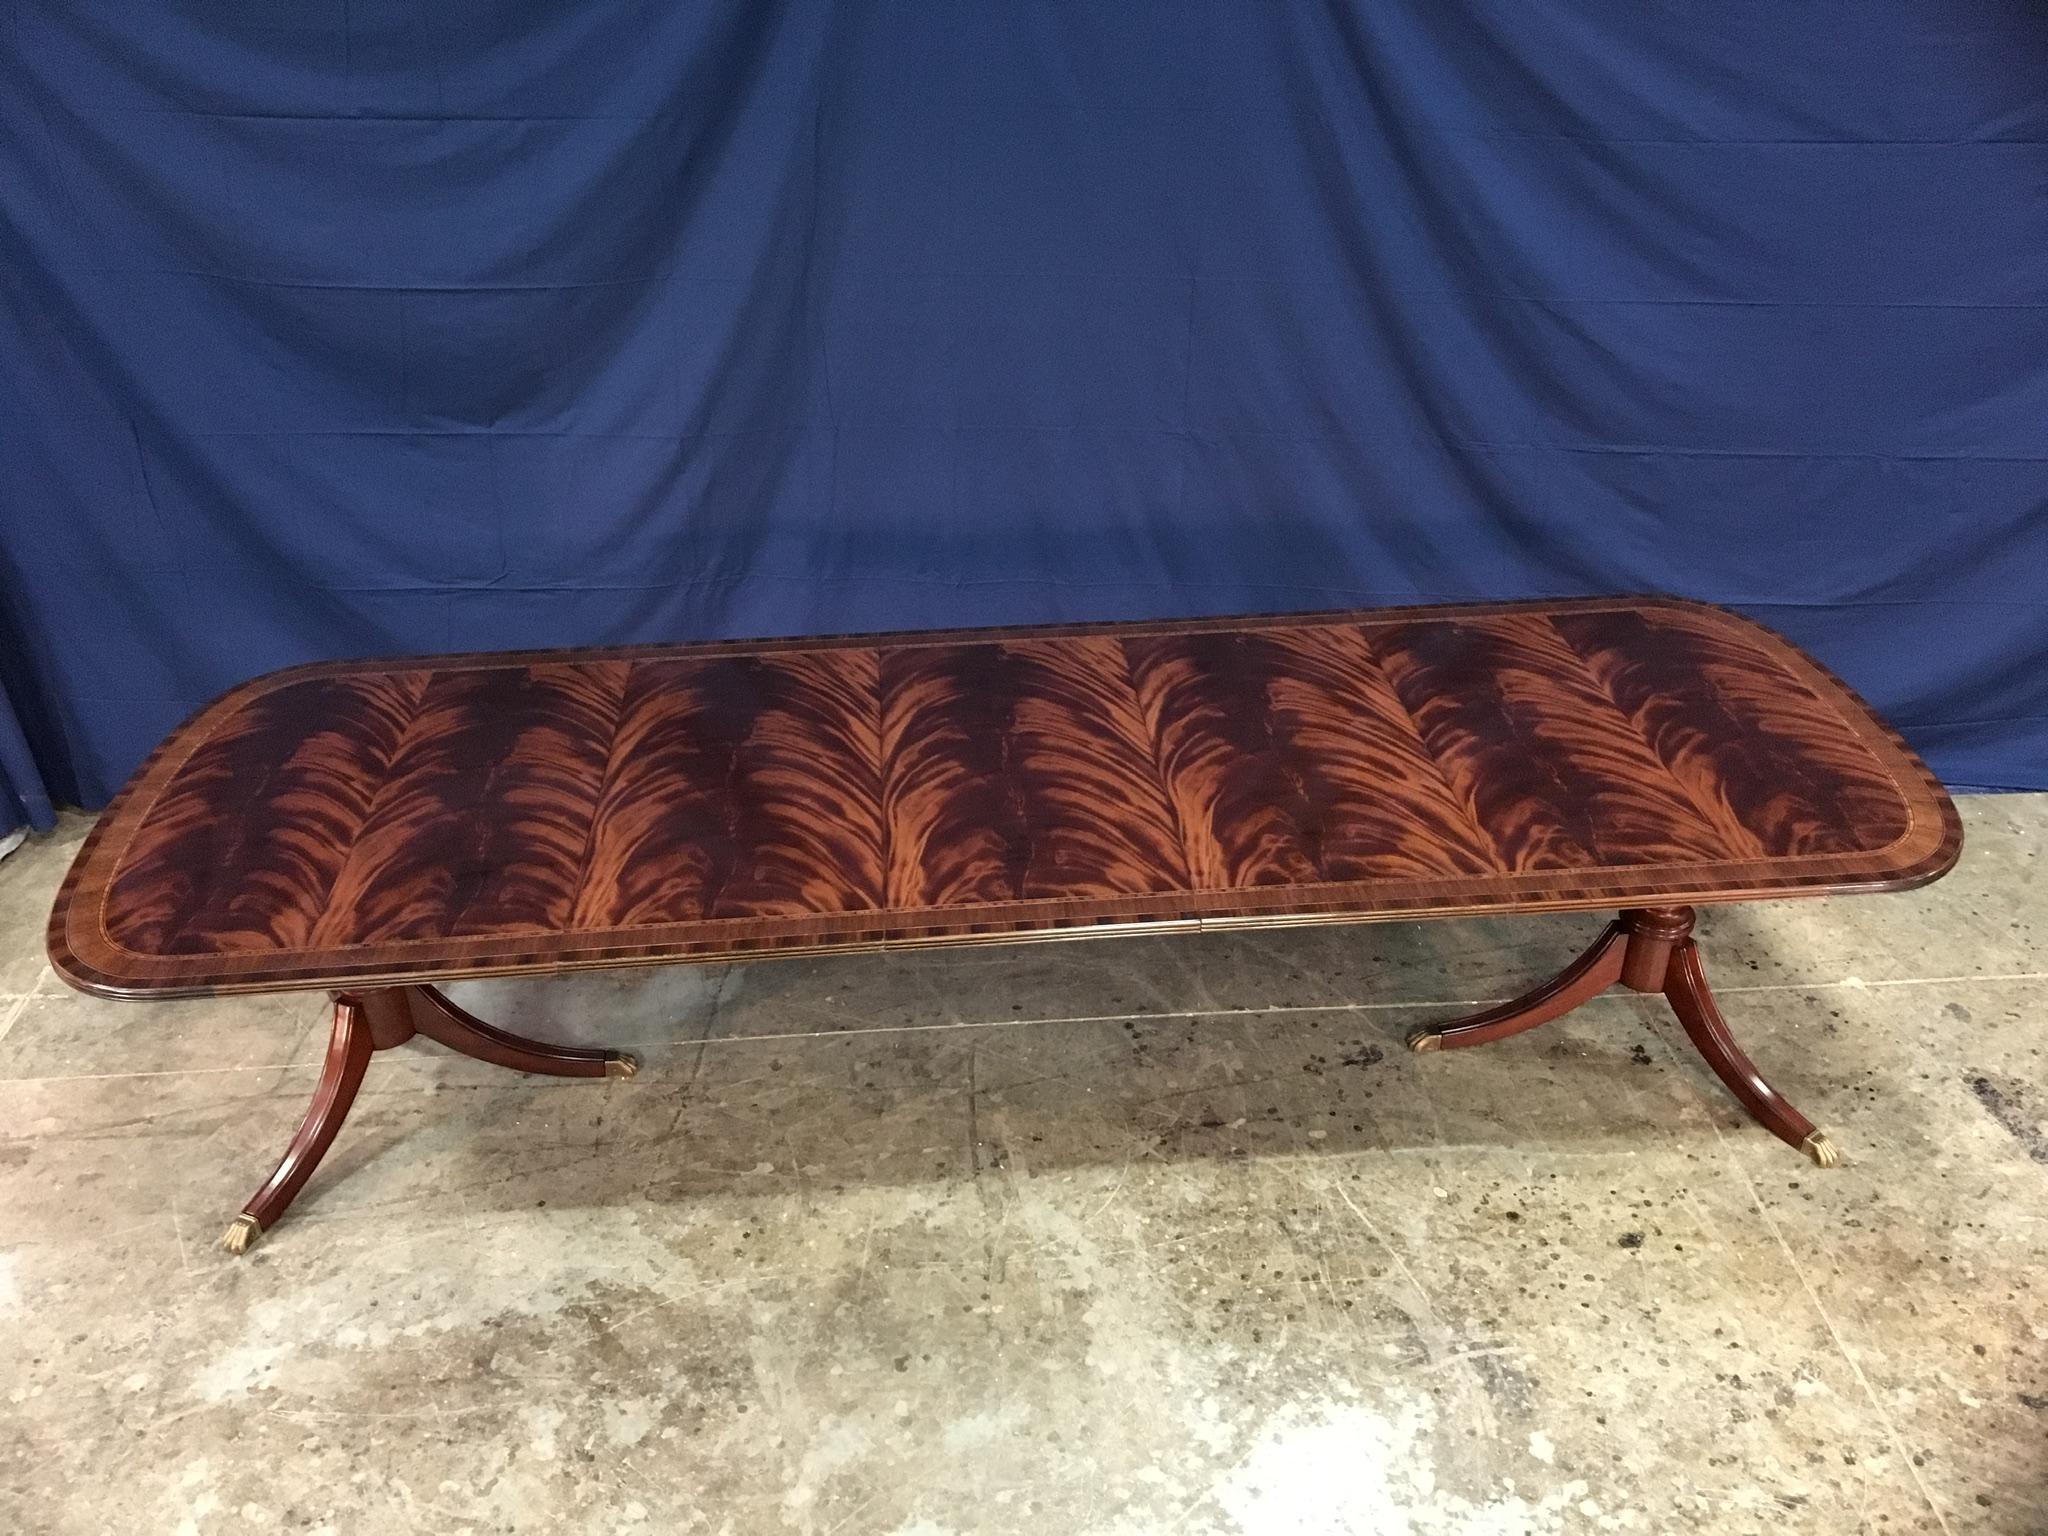 This is a made-to-order large traditional mahogany dining table made by Leighton Hall. It features a field of slip-matched swirly crotch mahogany from West Africa and straight grain mahogany and Santos rosewood borders from South America. The